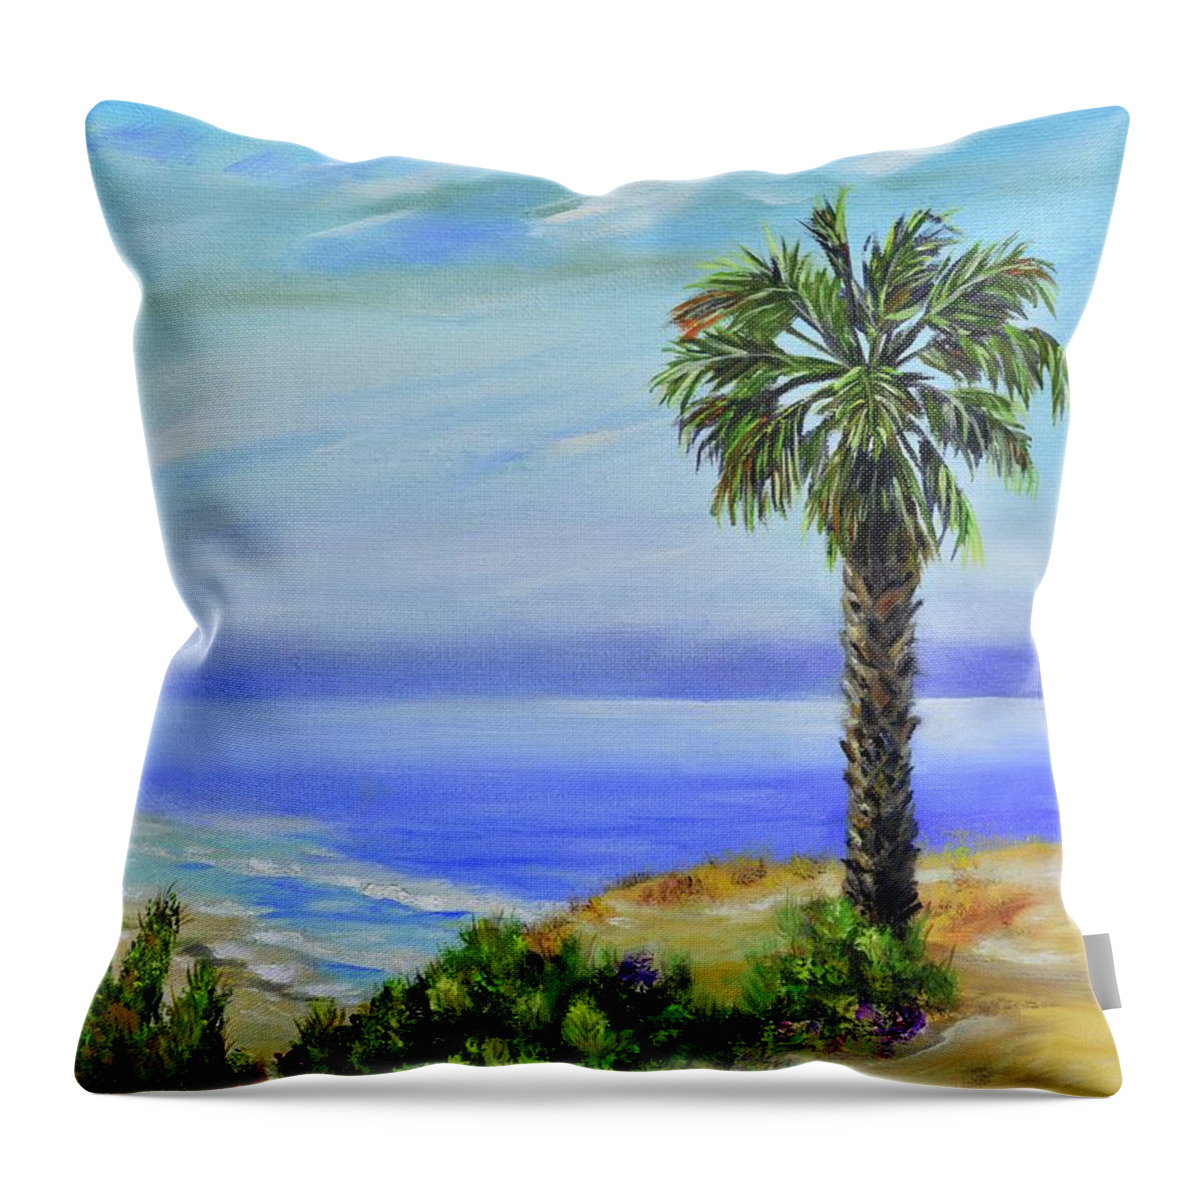 La Rambia Street Throw Pillow featuring the painting La Rambia, San Clemente by Mary Scott